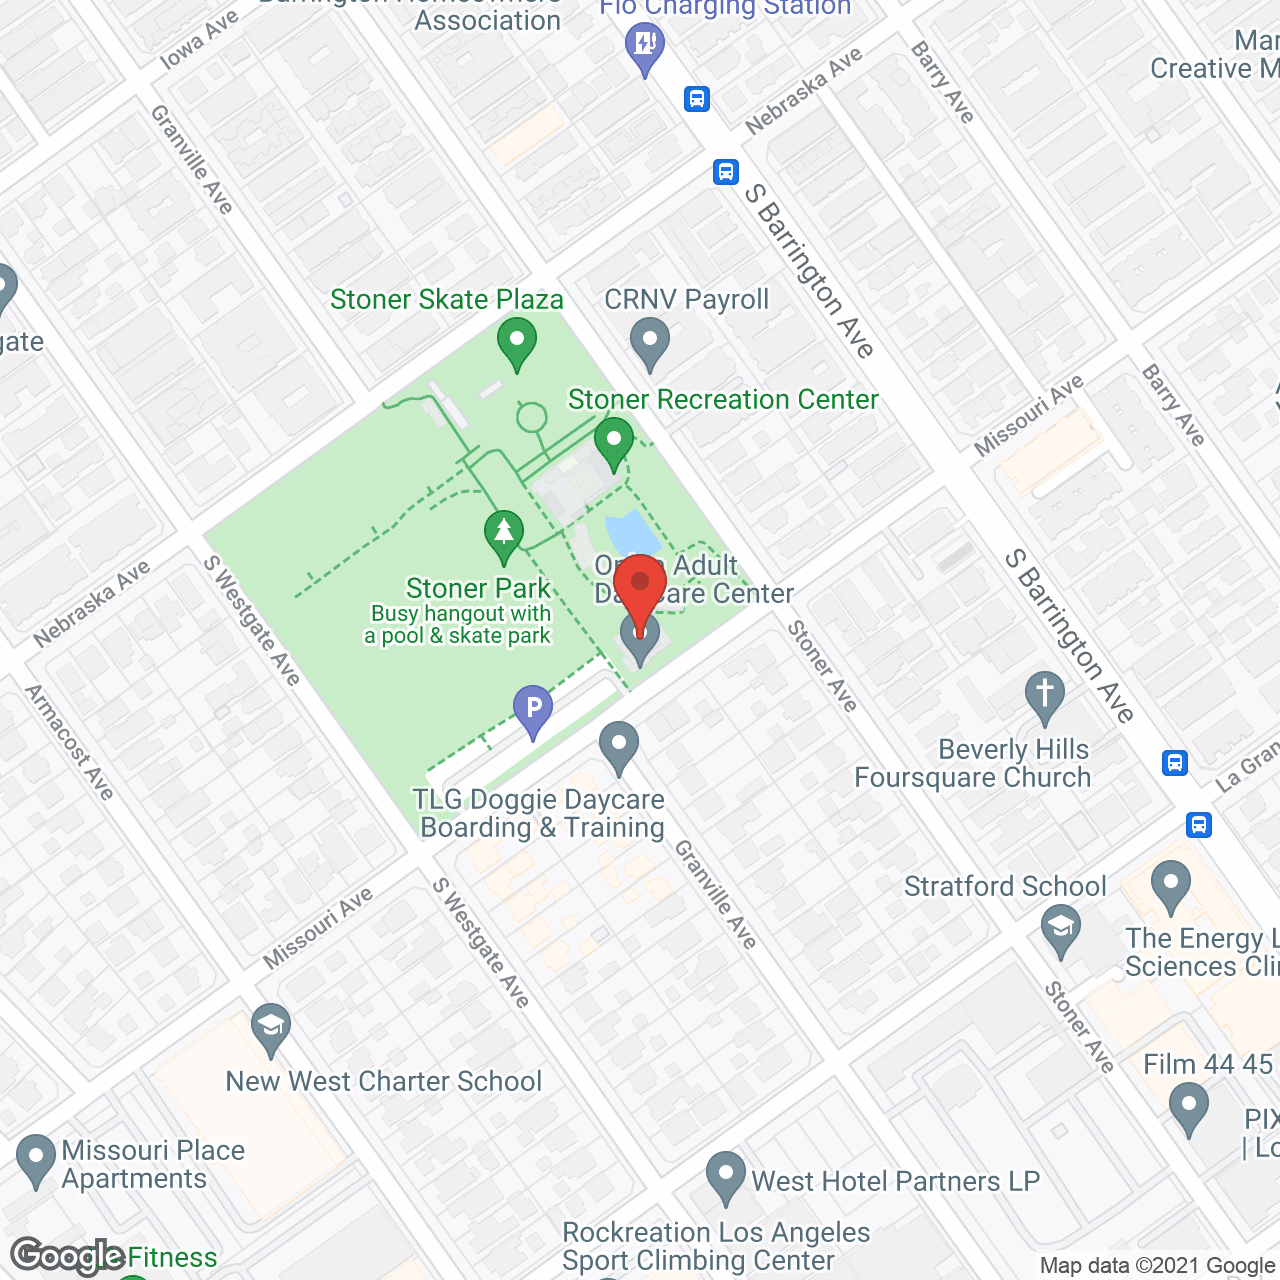 OPICA in google map